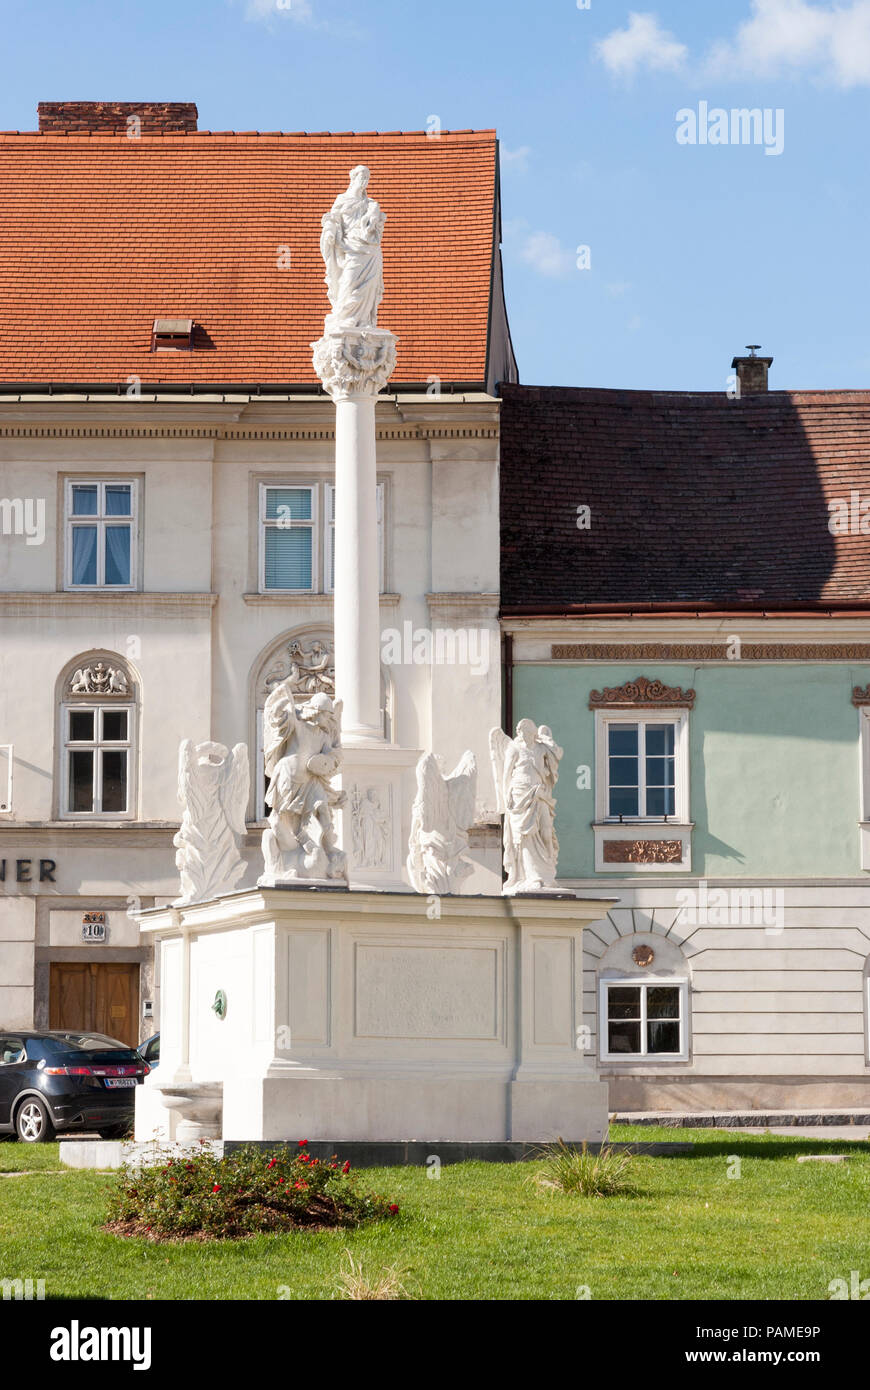 This Mariensäule (marian column) was erected in 1688 and is attributed to Andreas Krimmer. Krems old town, Lower Austria Stock Photo